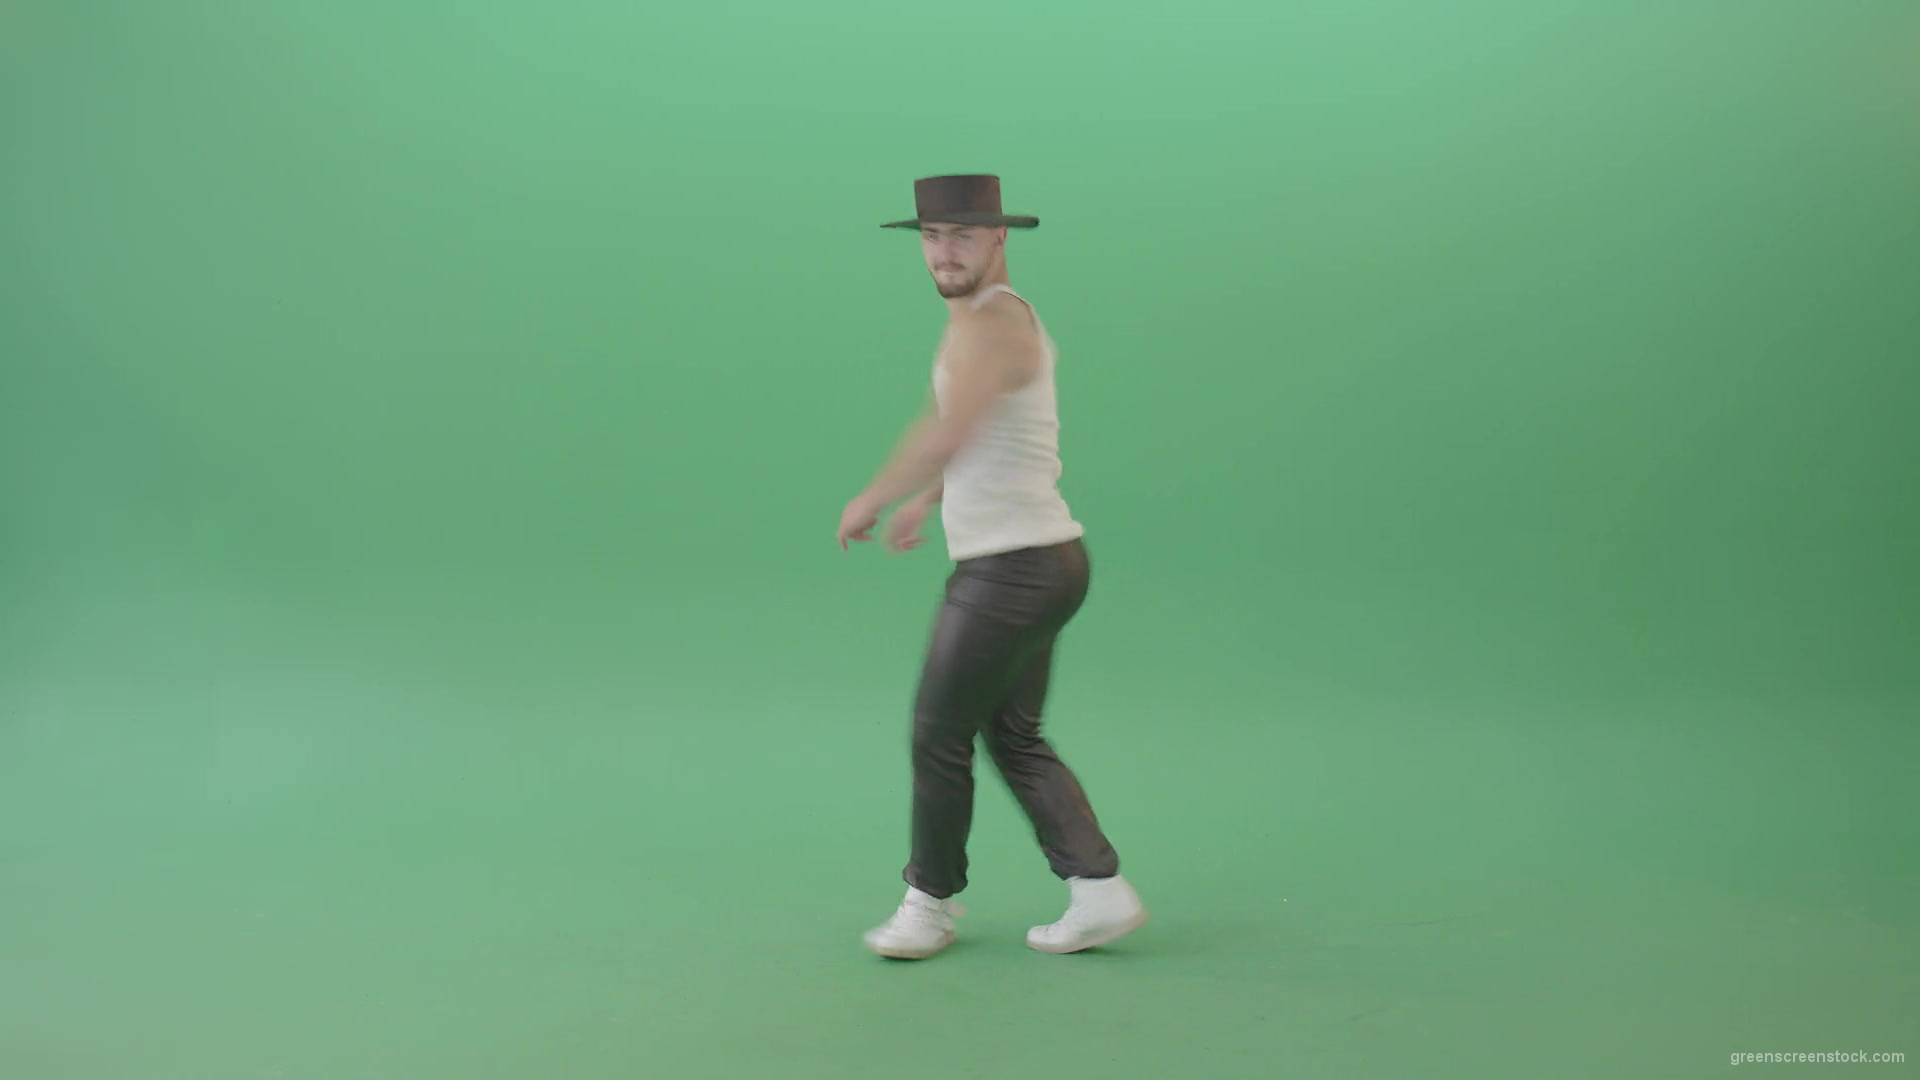 Michael-Jackson-Turn-spinning-and-dance-by-funny-man-isolated-on-Green-Screen-4K-Video-Footage-1920_004 Green Screen Stock